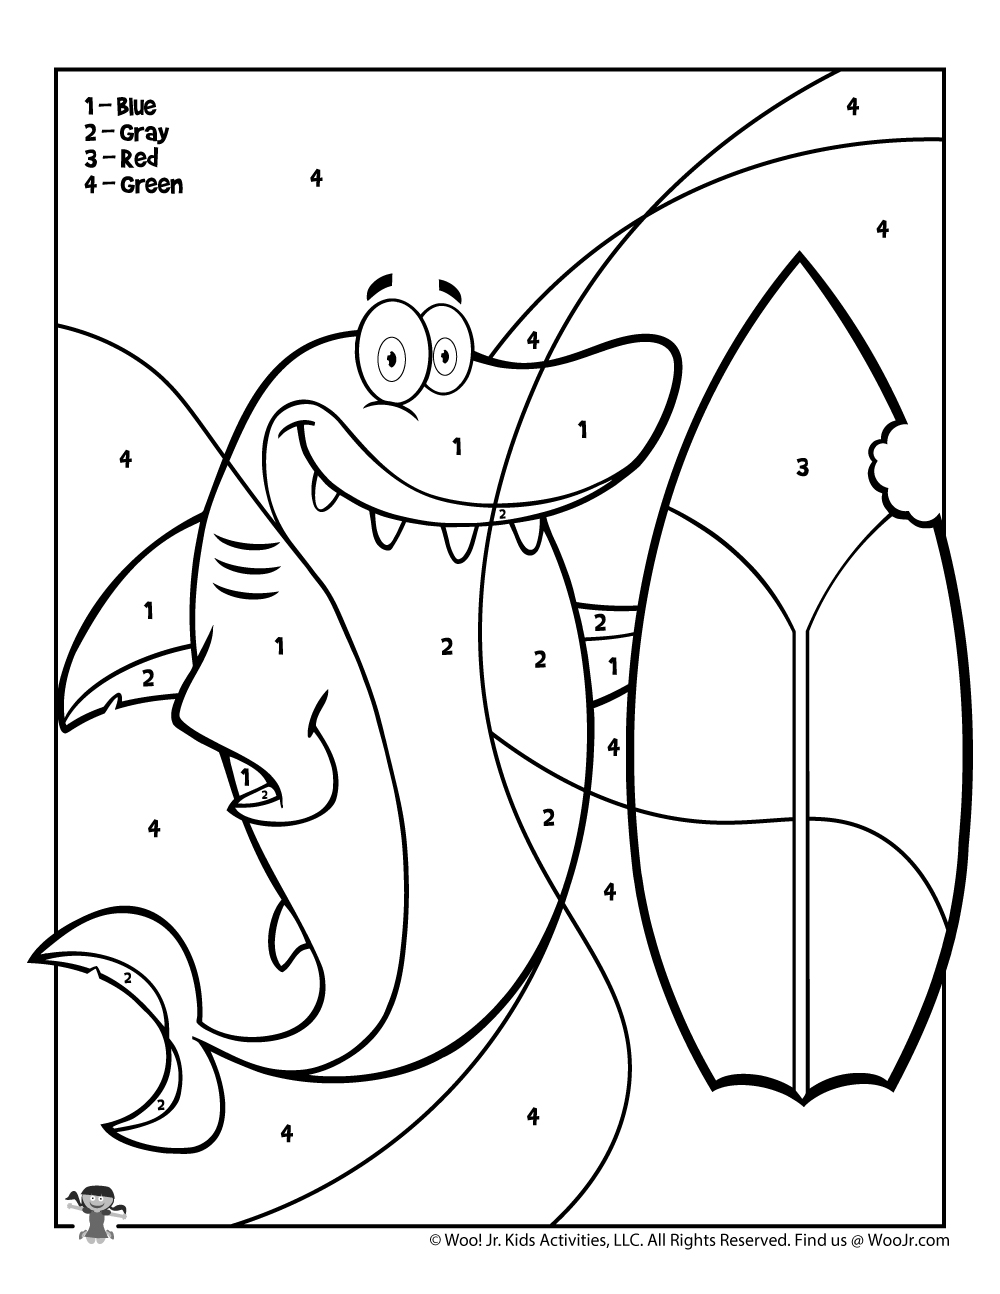 Shark Surf Board Color by Number Coloring Page | Woo! Jr. Kids Activities